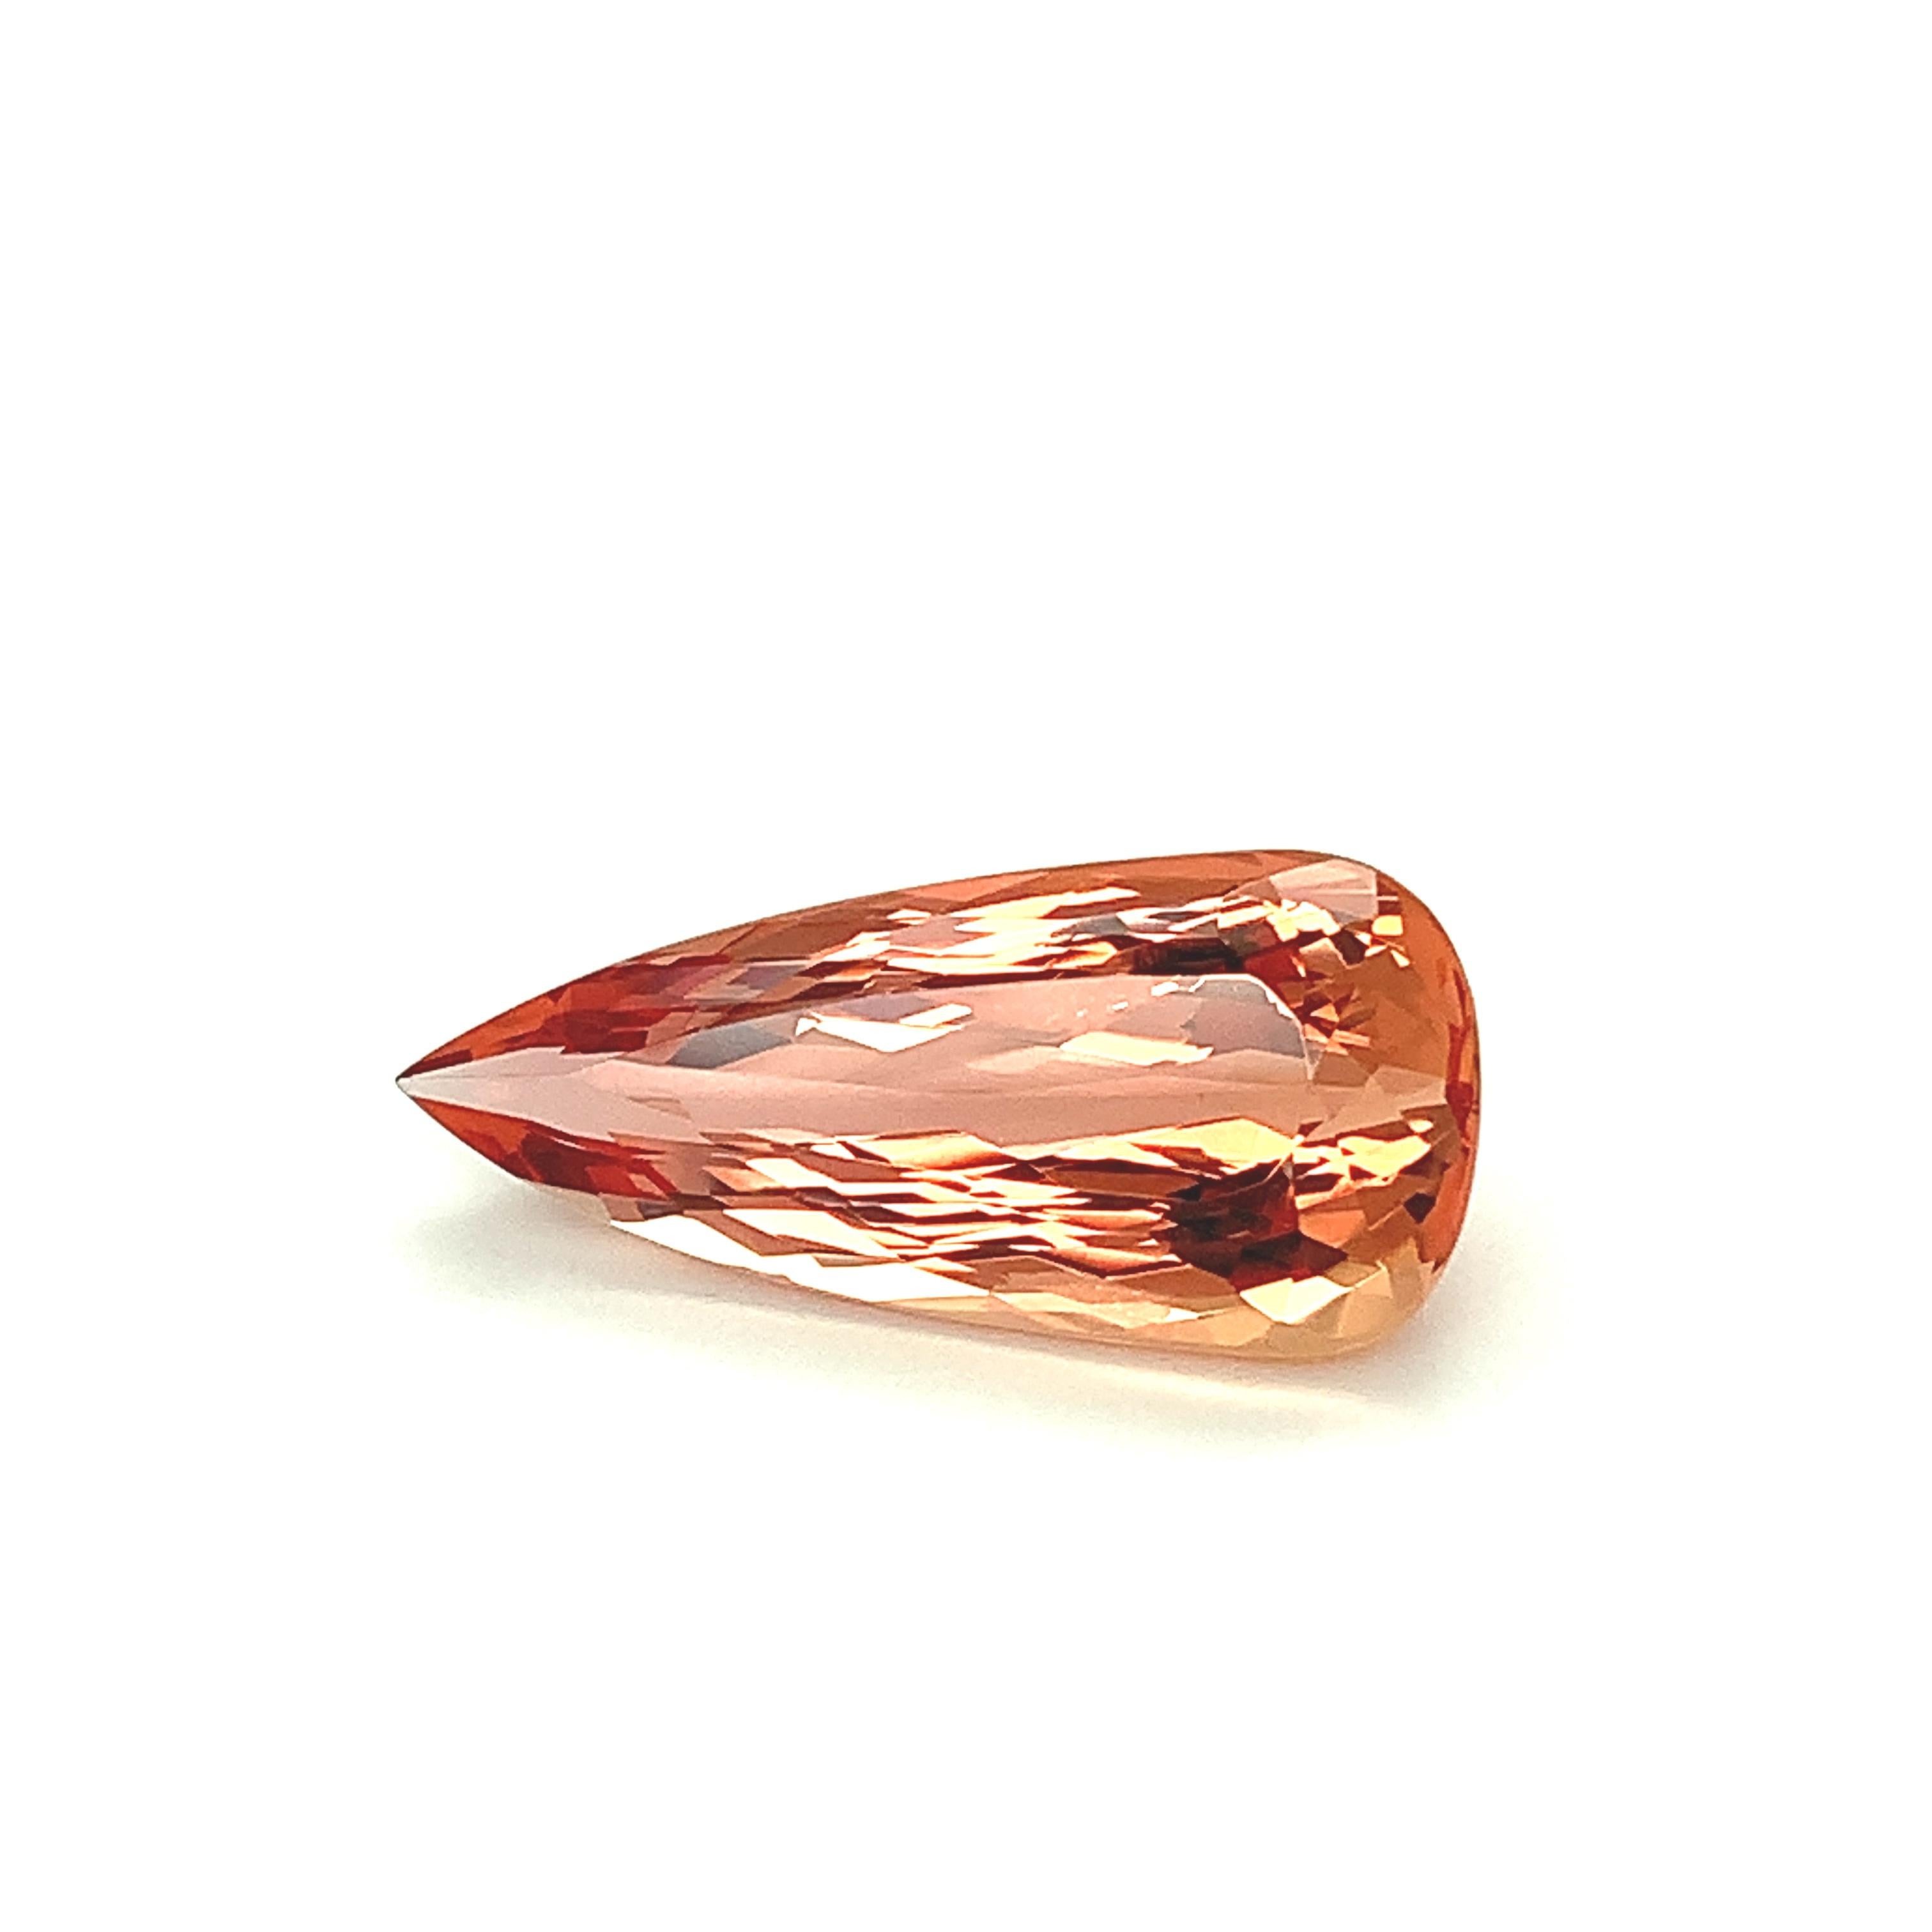 Pear Cut 15.90 Carat Orange Imperial Topaz, Unset Loose Gemstone, GIA Certified\ For Sale